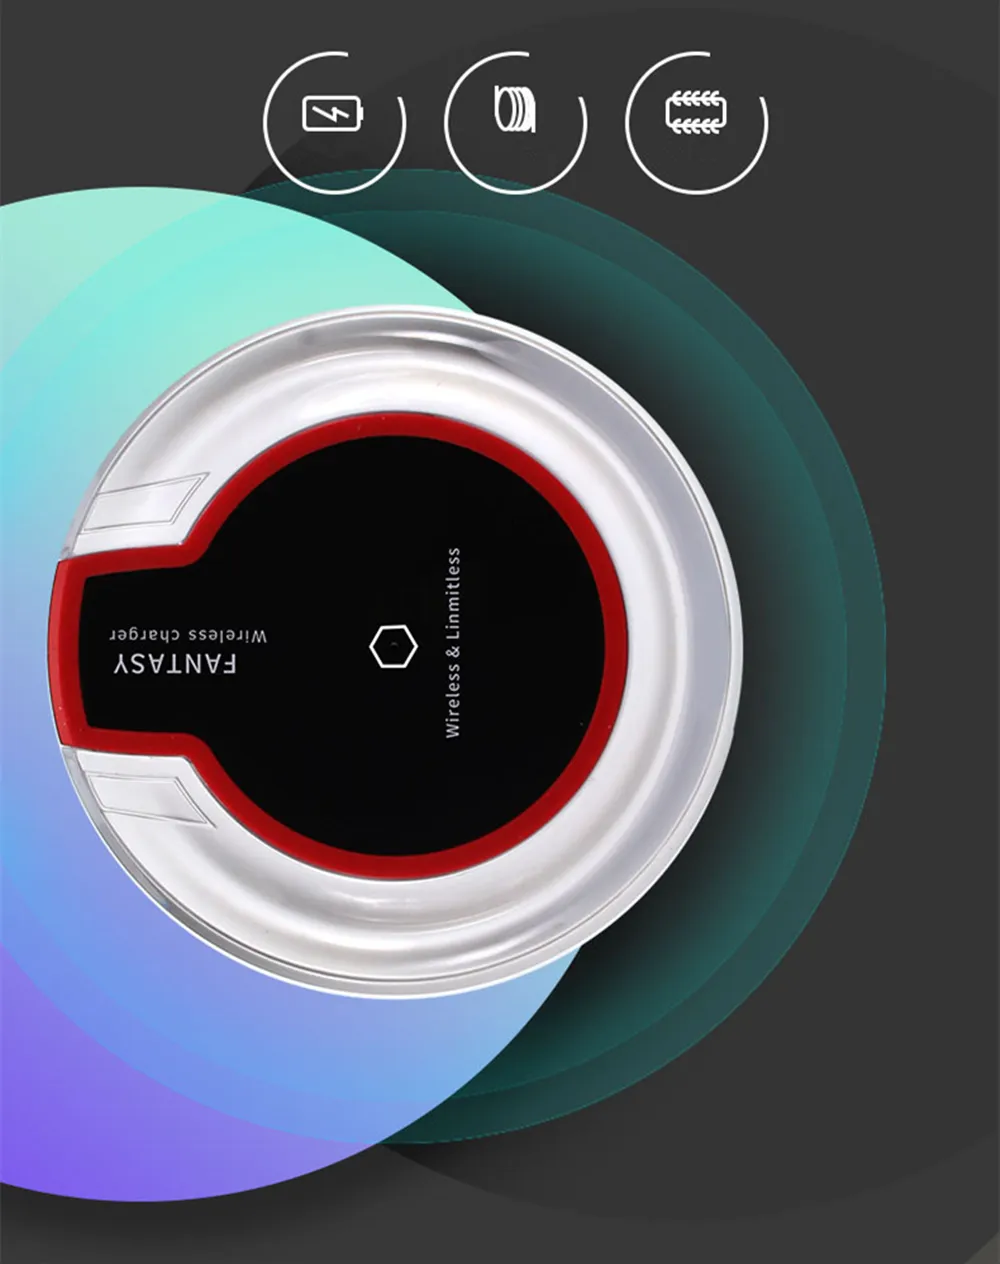 Qi Wireless Charger for iPhone X XS 11 Pro Max XR 8 Plus Samsung Galaxy S8 S9 S10 S20 Plus Xiaomi 9 10 Pro Wireless Charging Pad